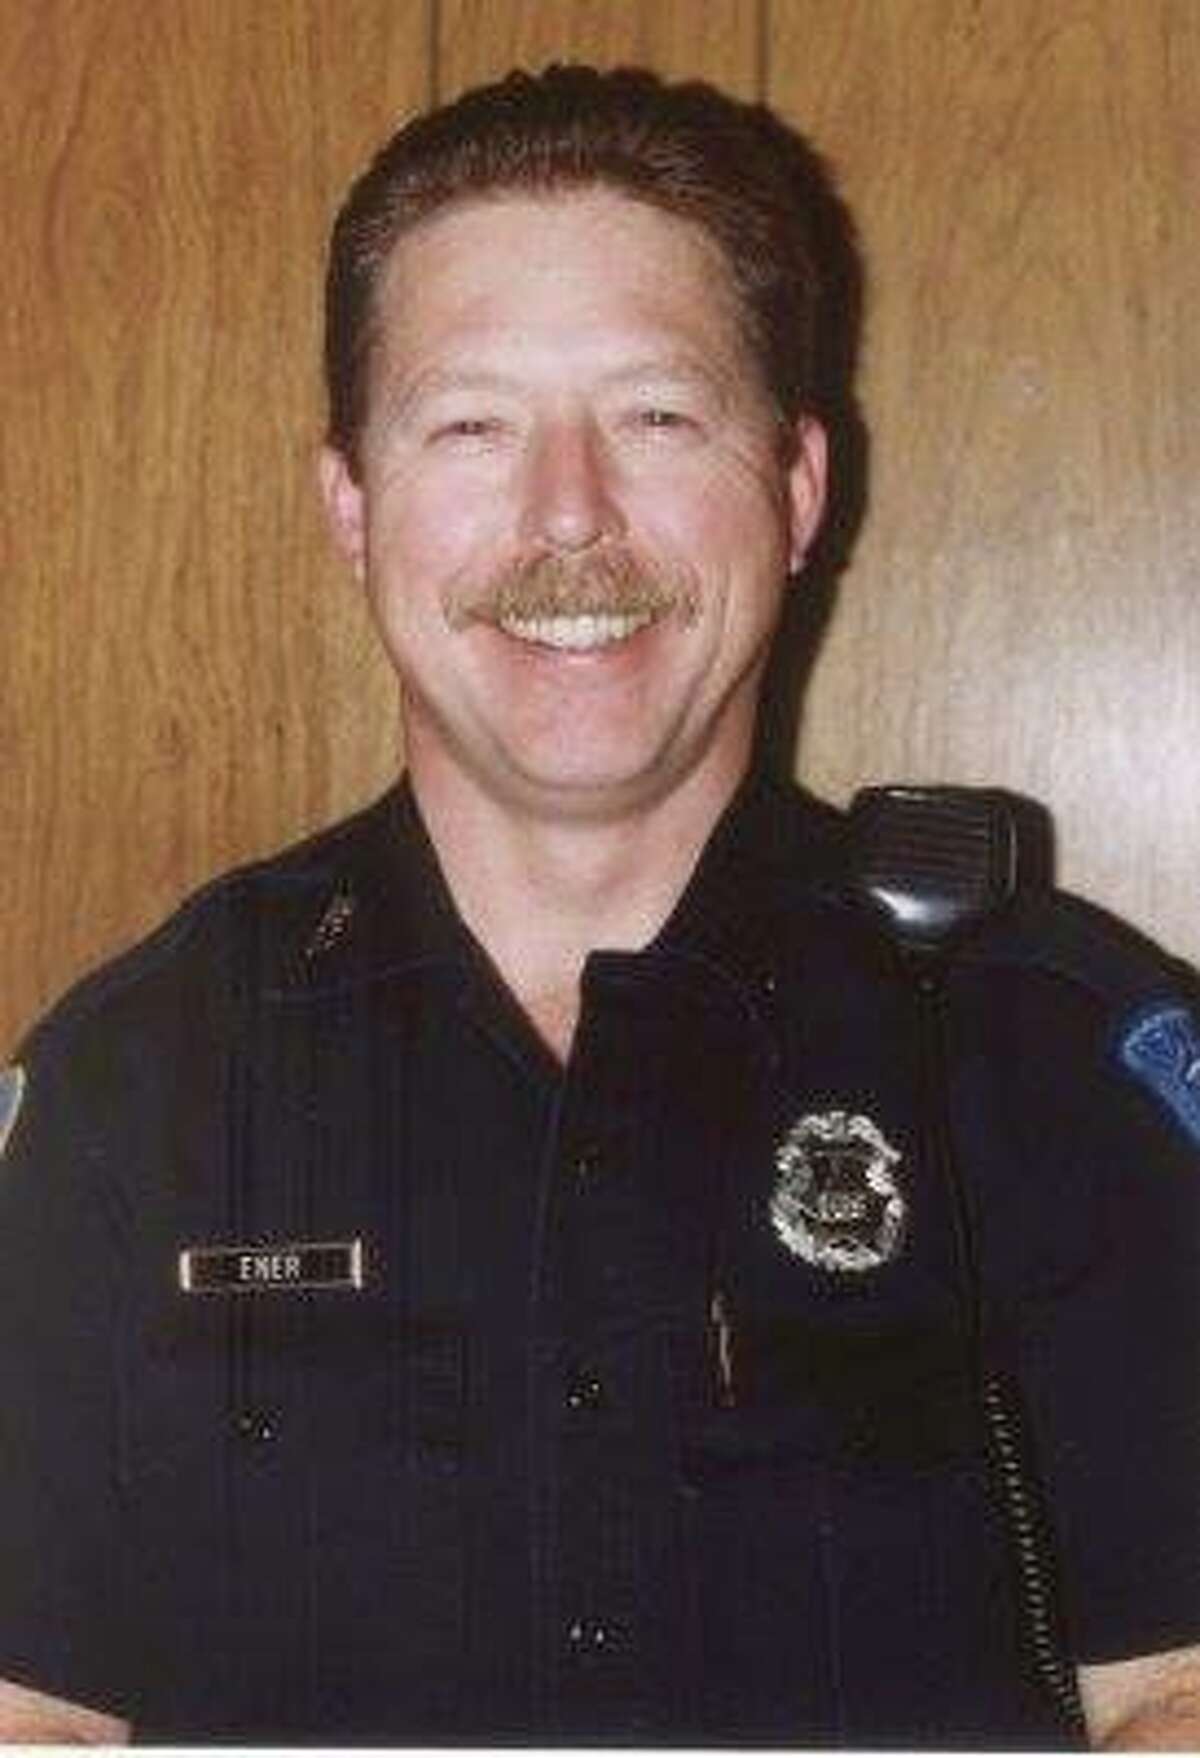 Detective Robert Ener, a 29 year veteran of the Beaumont Police Department, passed away after he was diagnosed with cancer last September.